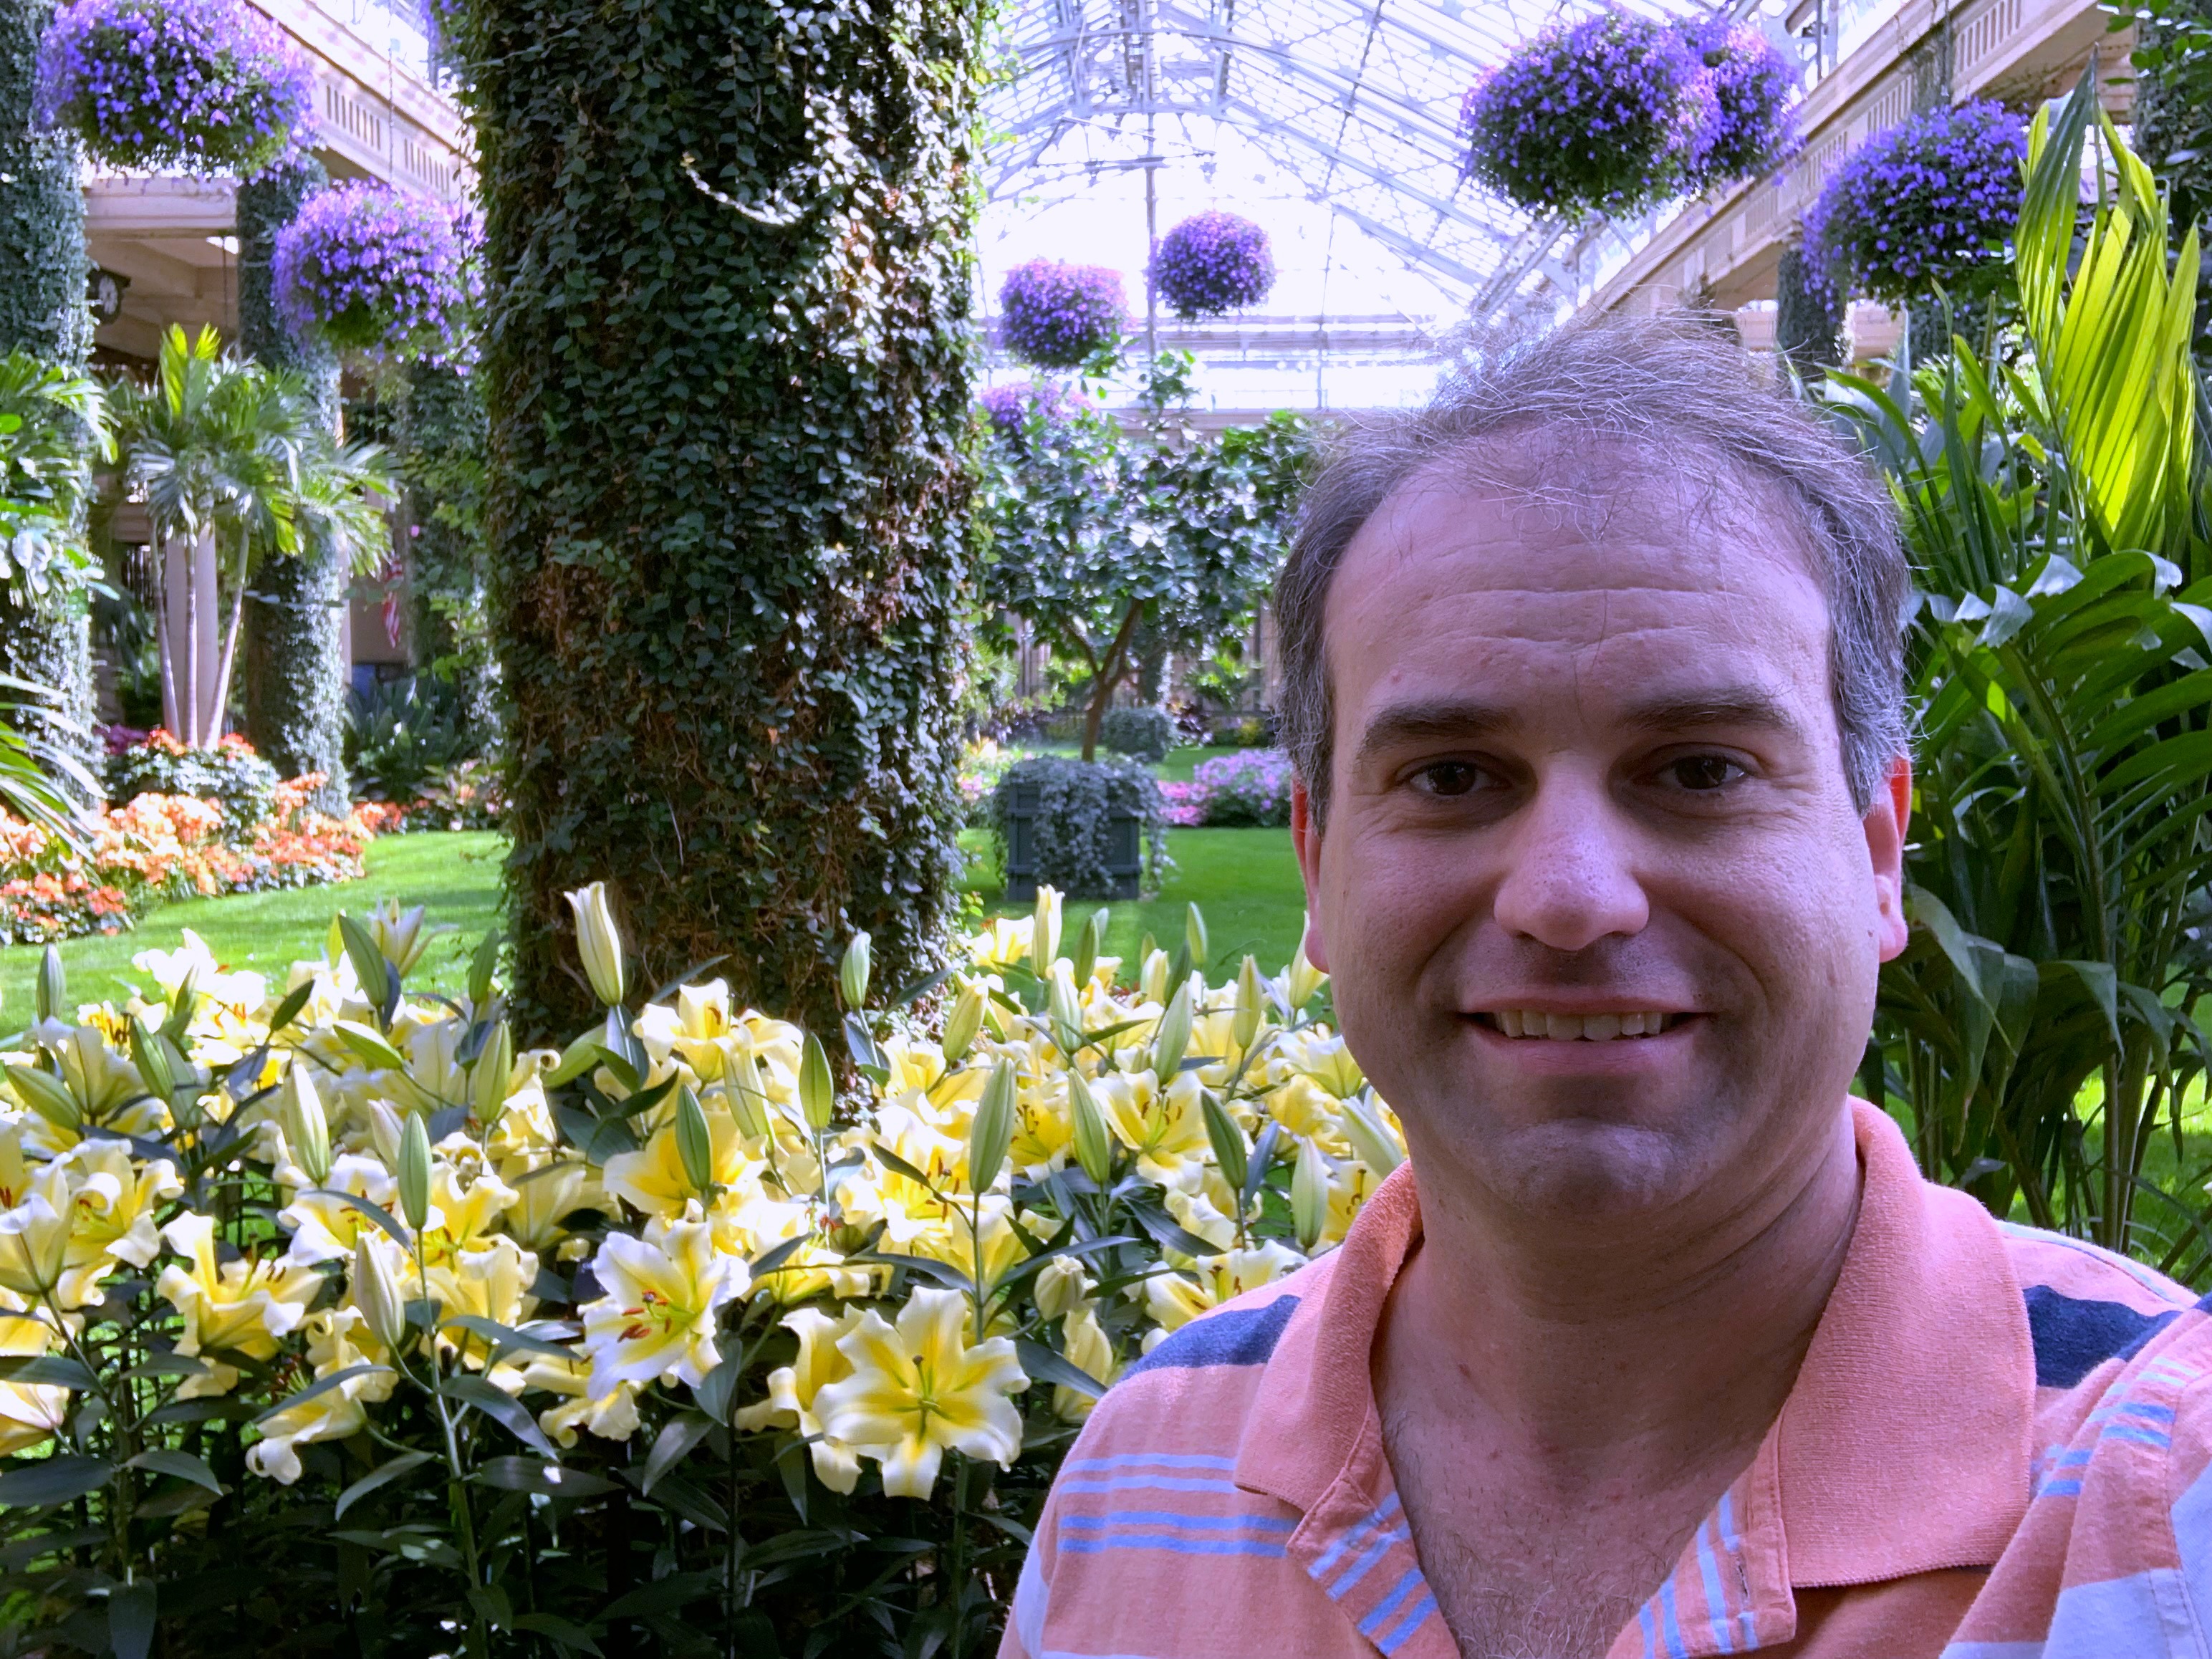 Here I am in the Conservatory at Longwood Gardens in Kennett Square, Pennsylvania.